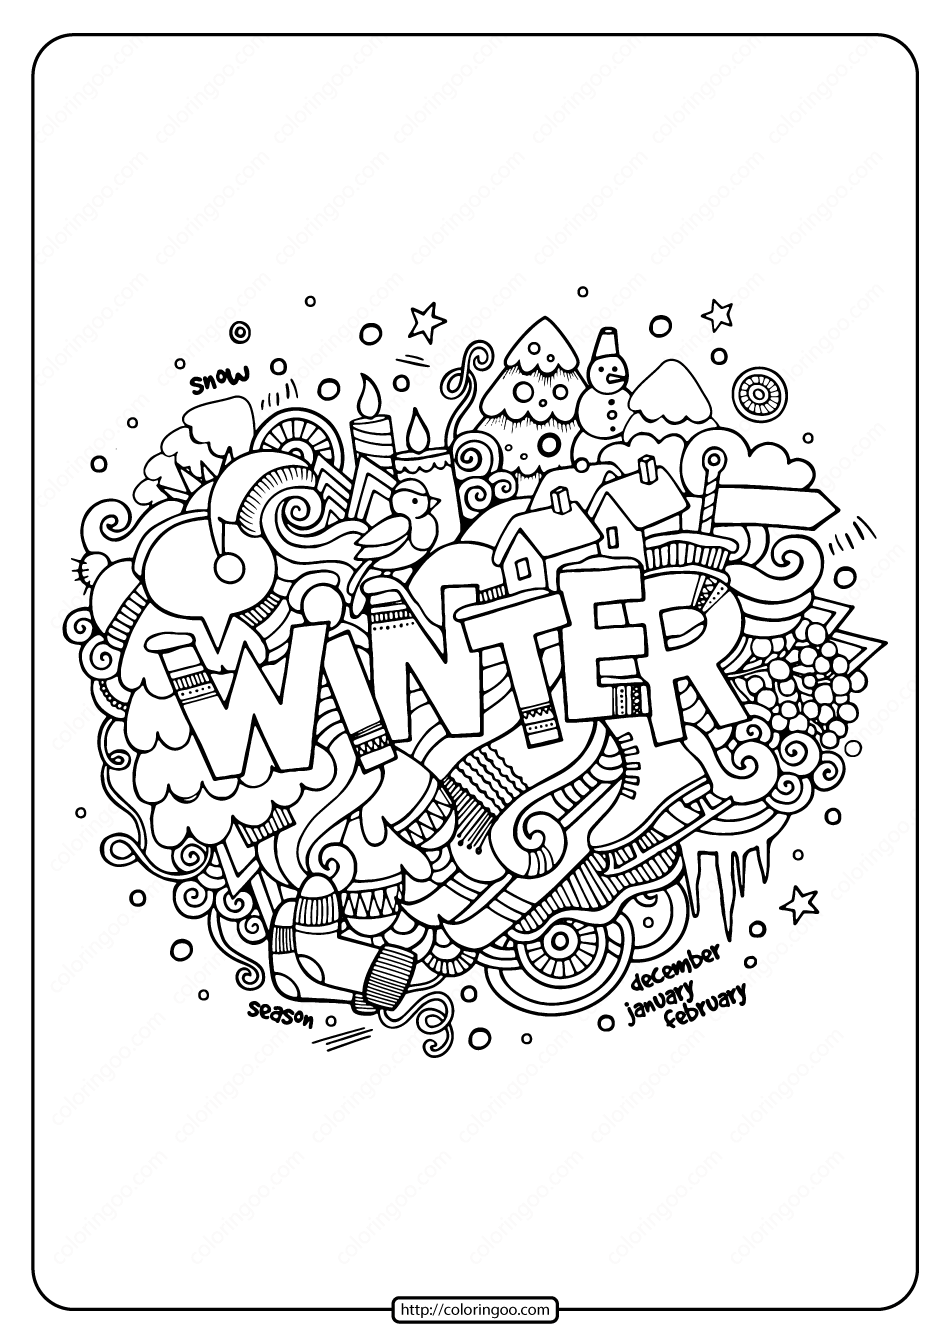 20 Free Winter Coloring Pages for Adults   Happier Human